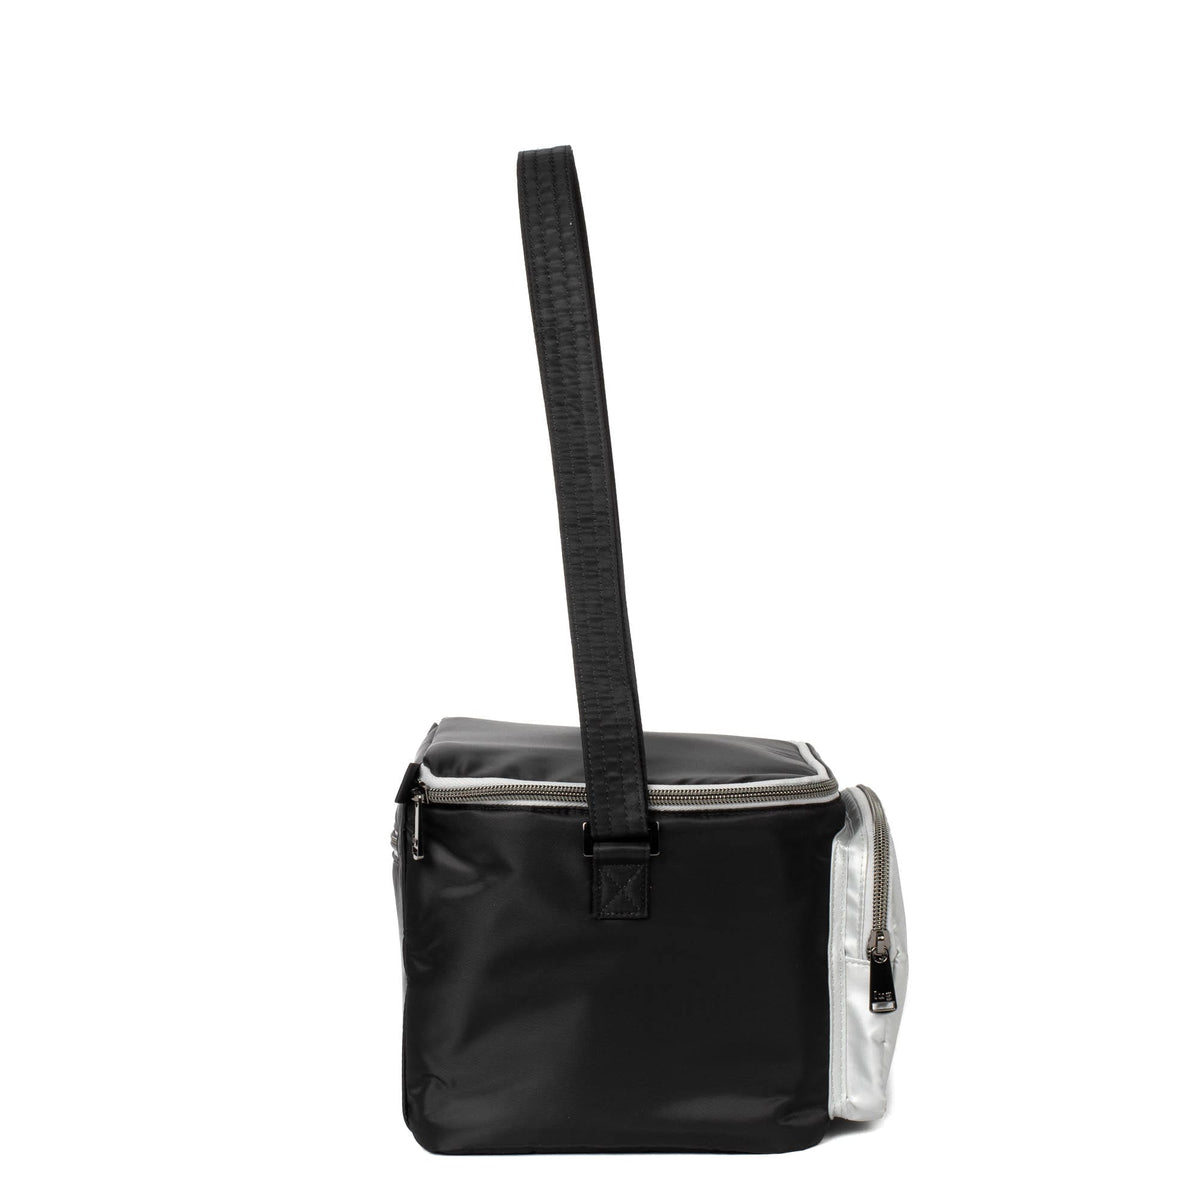 Whisk Lunch Tote